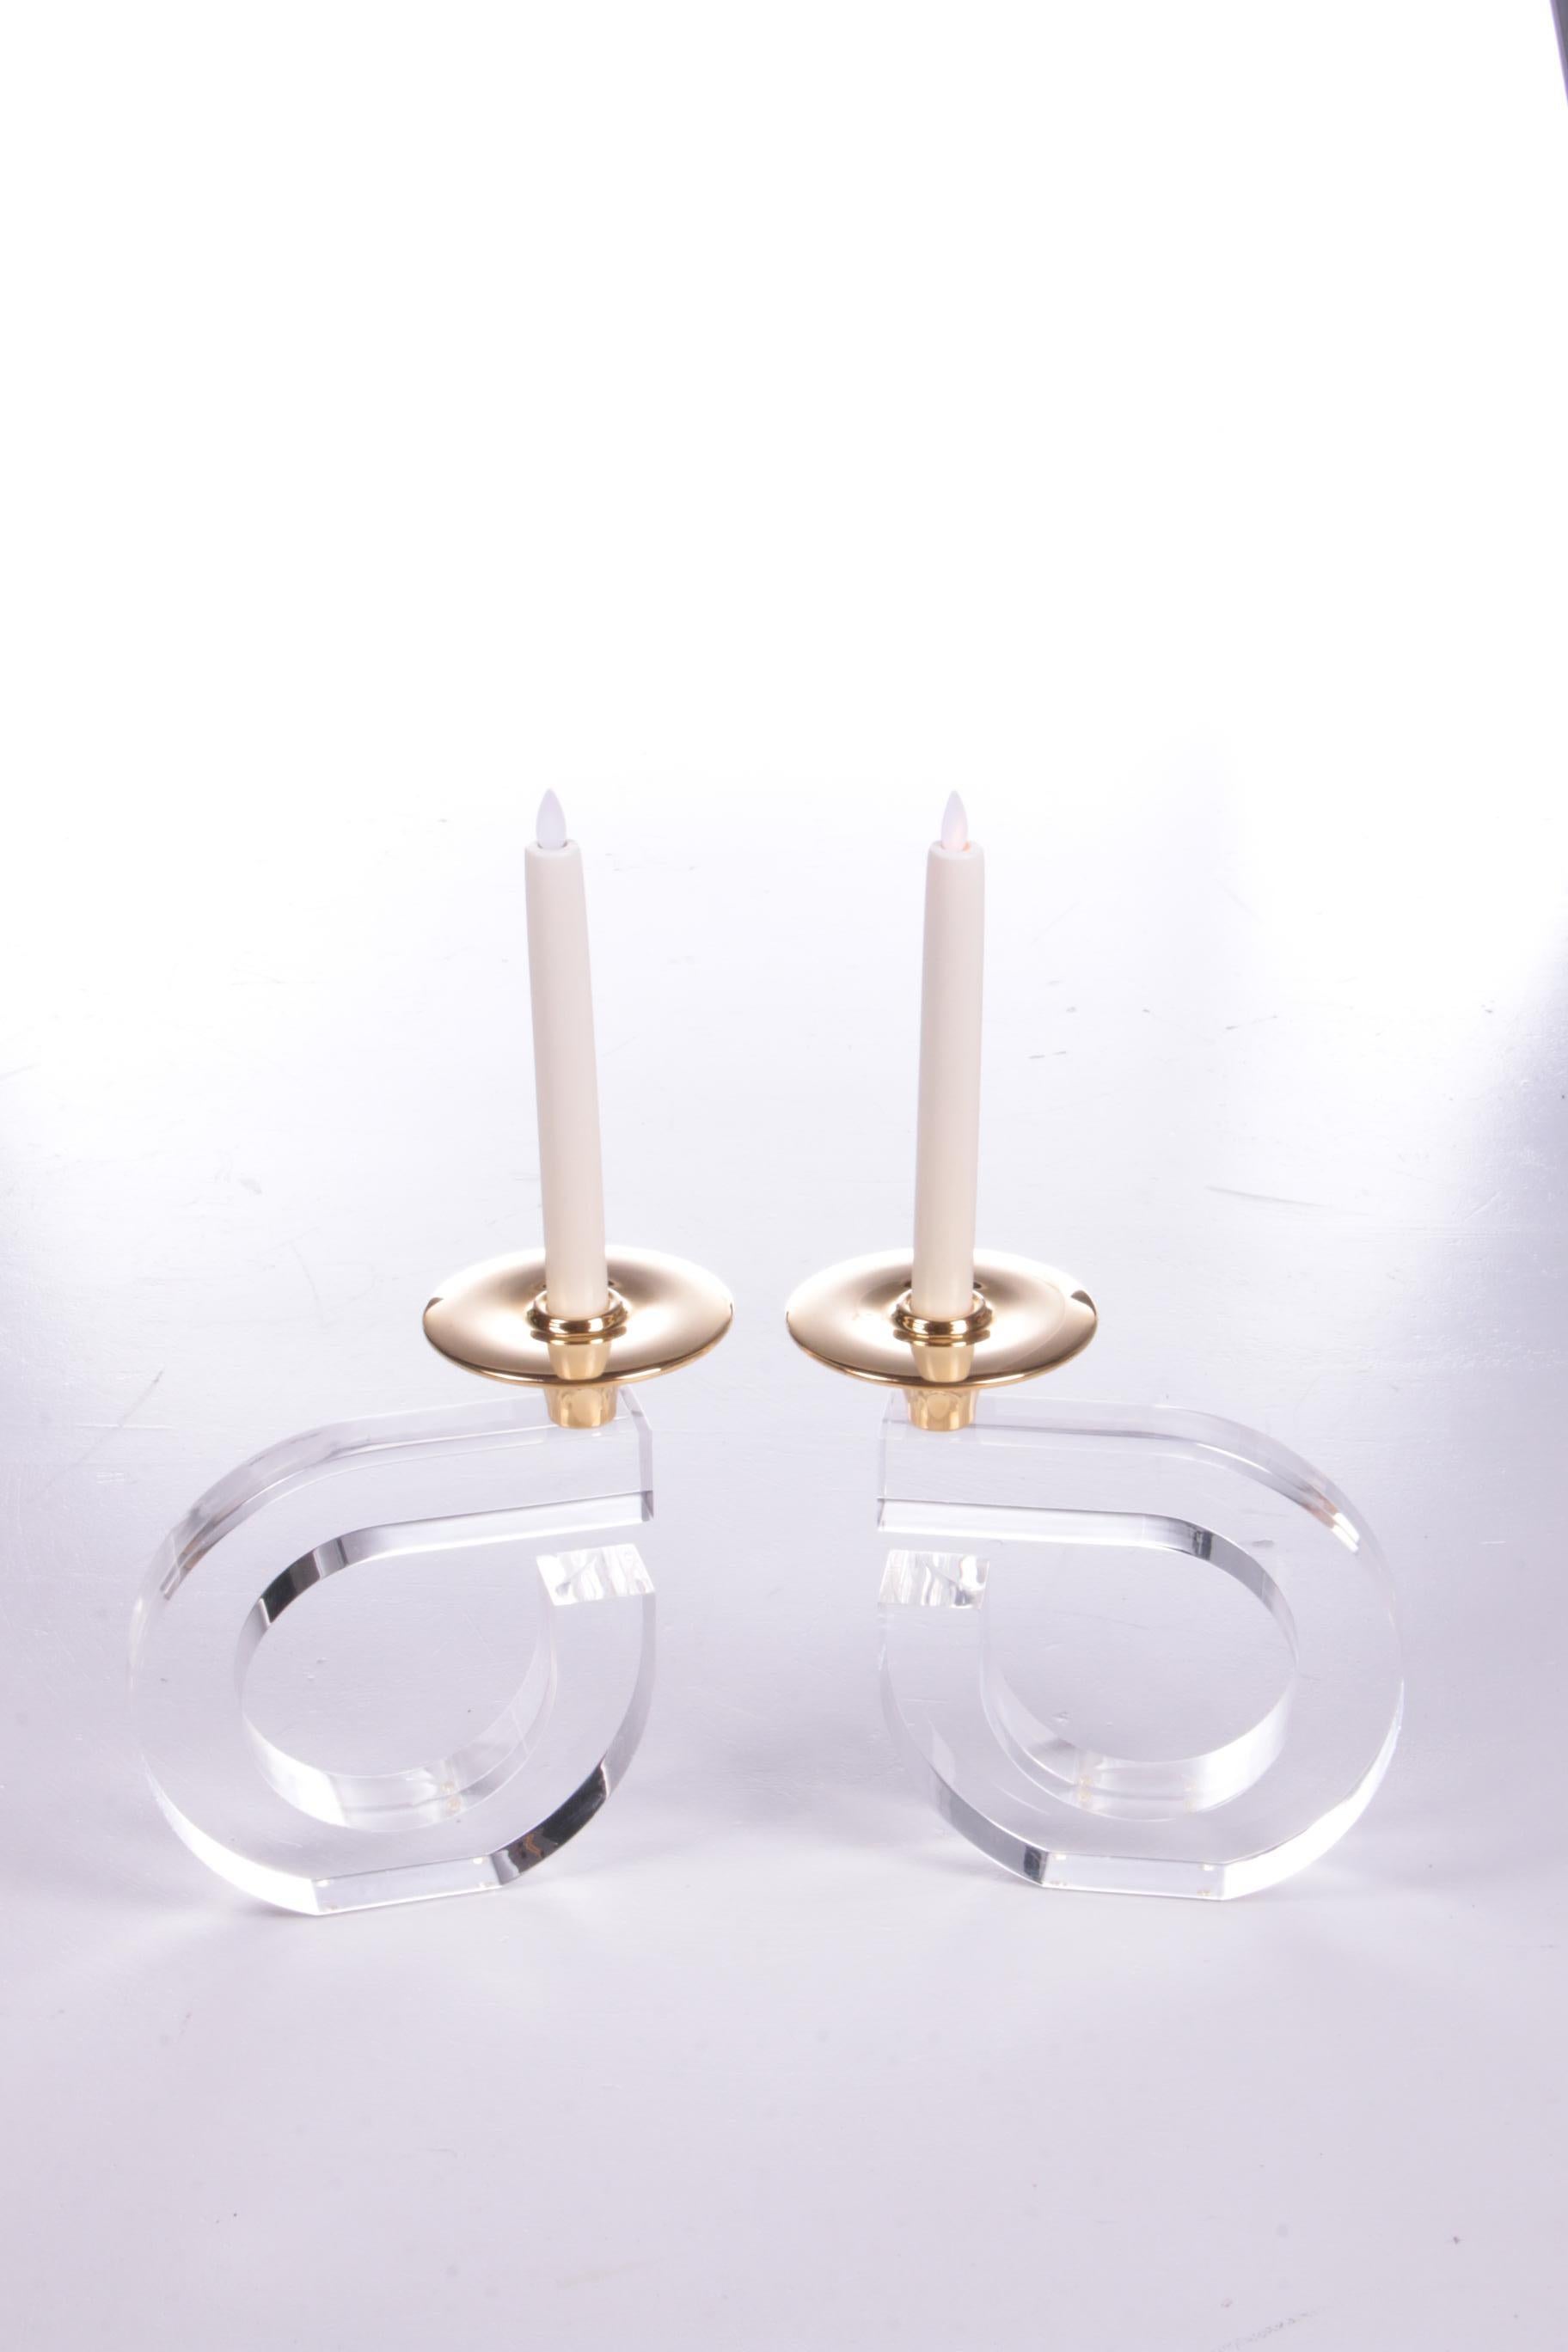 Hollywood Regency Set of Plexiglas candlesticks, 1970

Beautiful set of plexiglass candlesticks. These beautifull candlesticks are perfect as a centerpiece on any table in any interior. These candlesticks will certainly be an eye catcher.

A nice